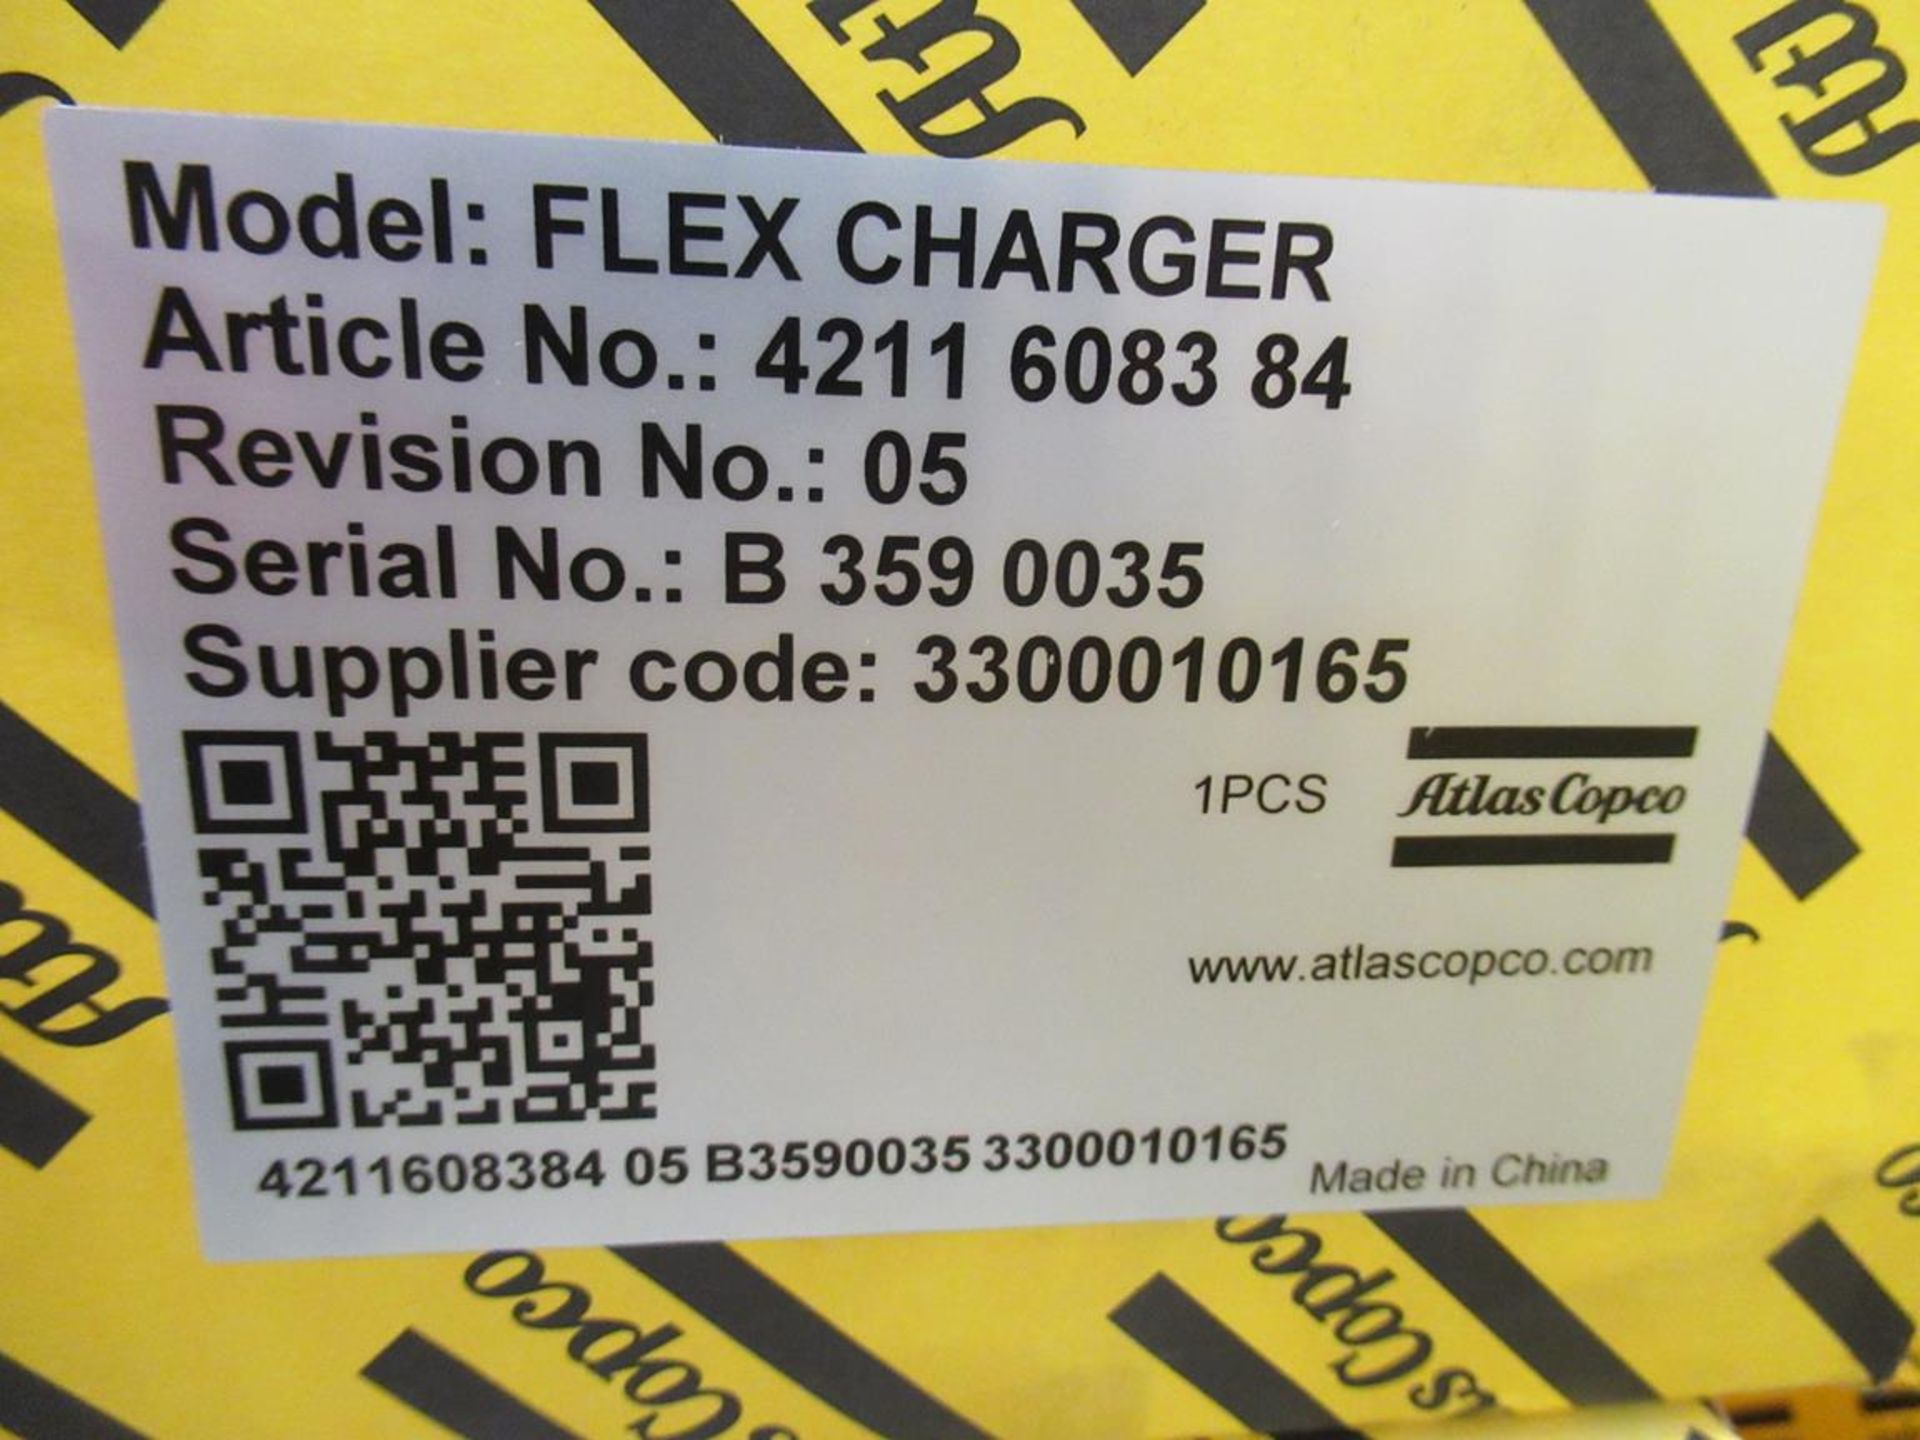 4x (no.) Atlas Copco, flex charger, Article No. 4211 6083 84 (boxed and unused) - Image 3 of 3